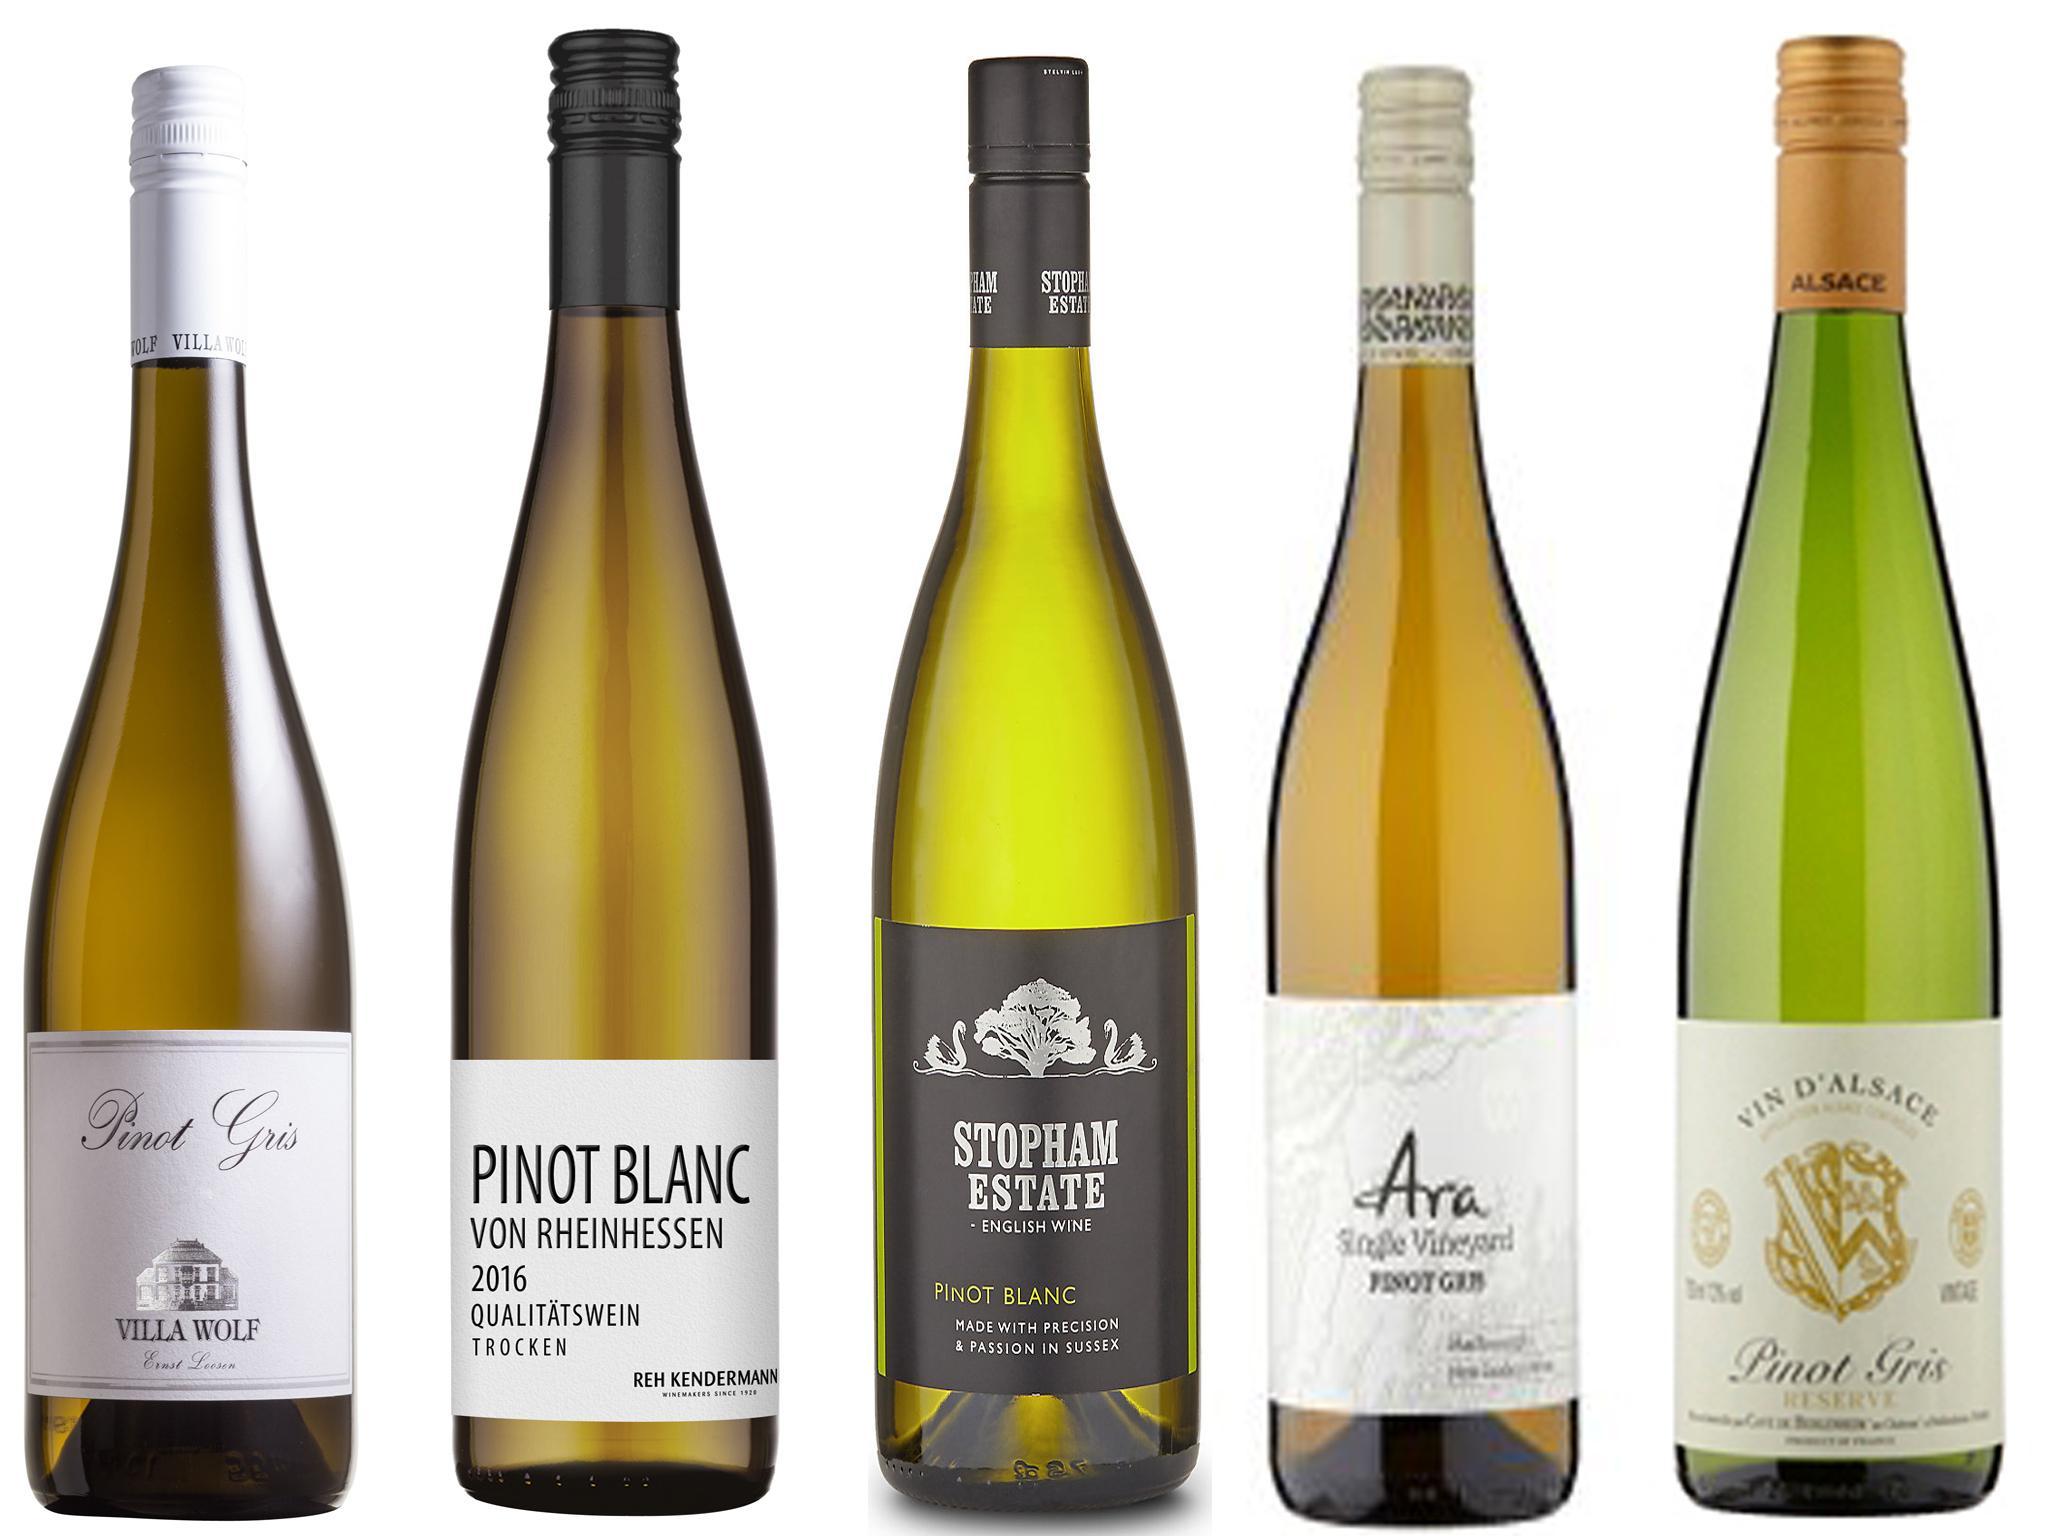 Pinot gris, the predominant grape in Alsace, produces characterful wines that stand up to more demanding foods